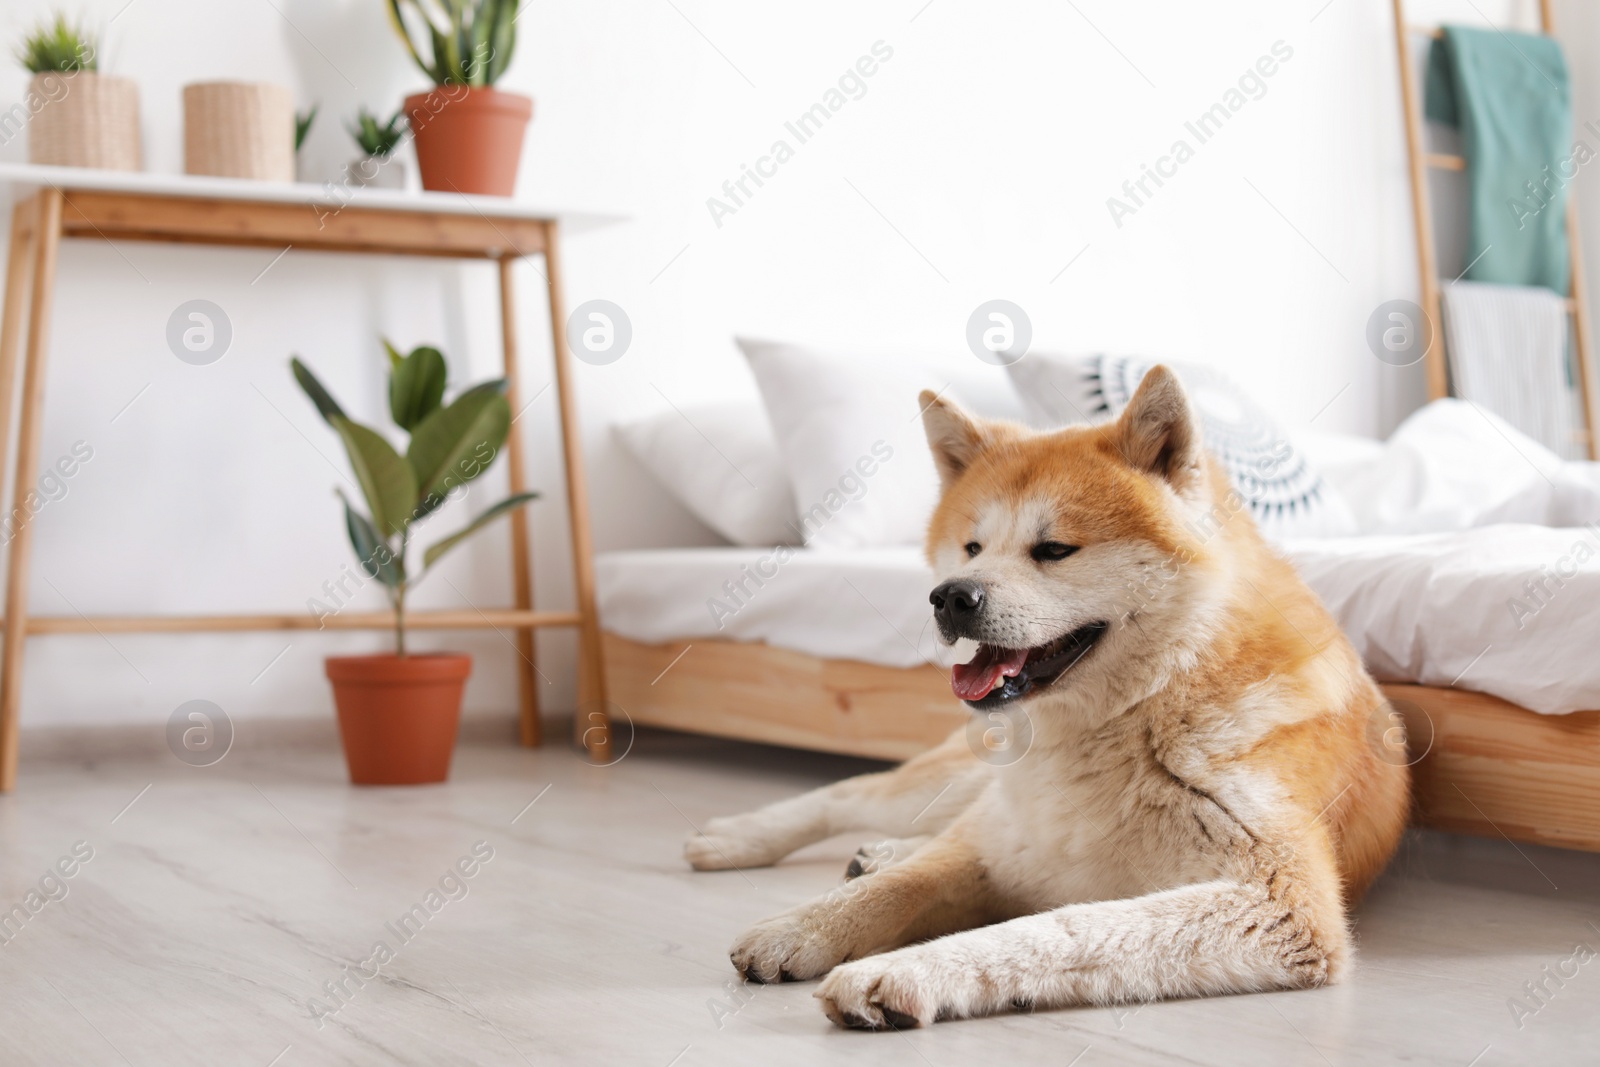 Photo of Cute Akita Inu dog near bed in room with houseplants, space for text